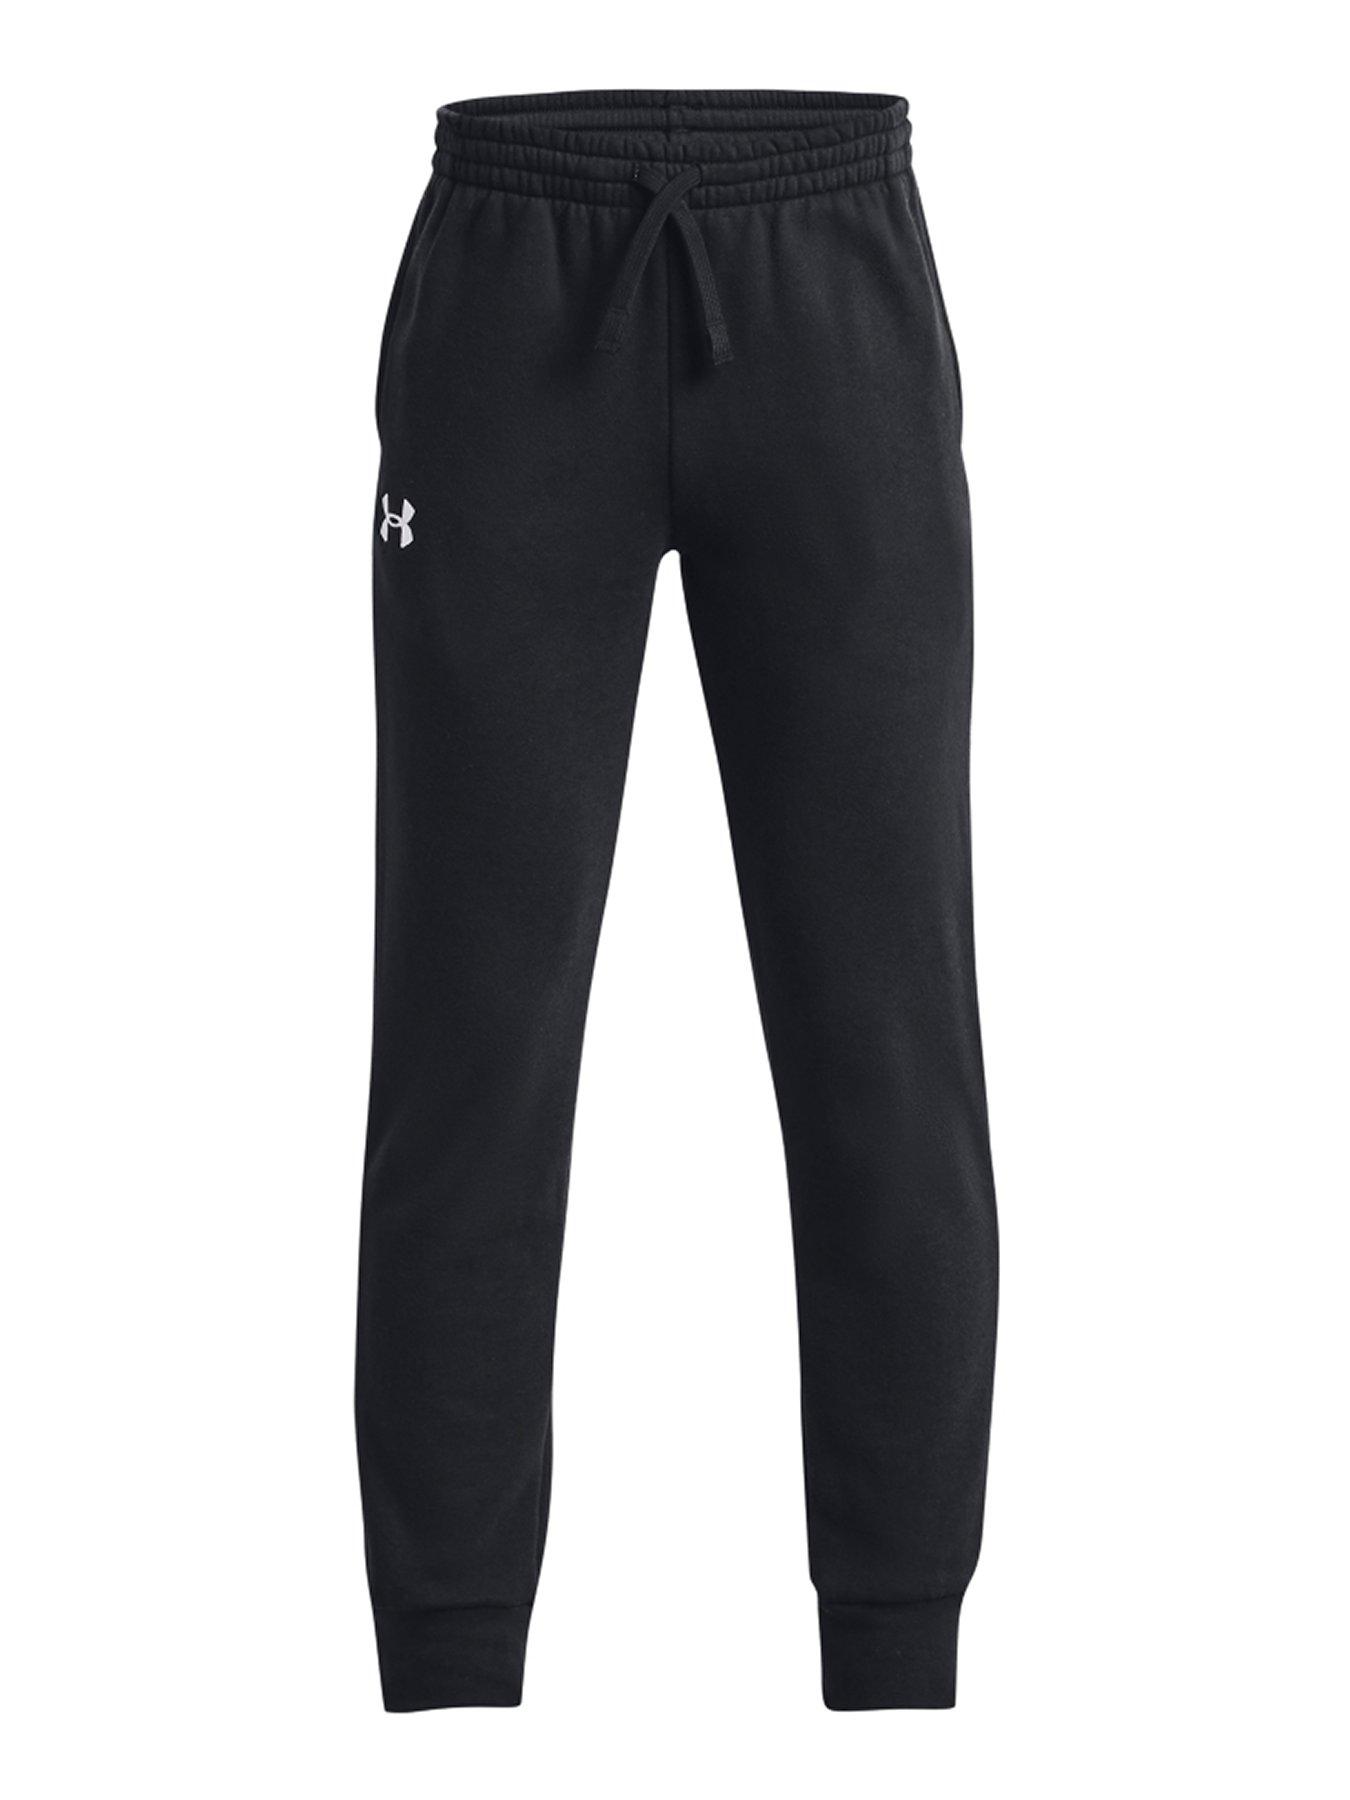 UNDER ARMOUR Mens Training Rival Fleece Joggers - Red